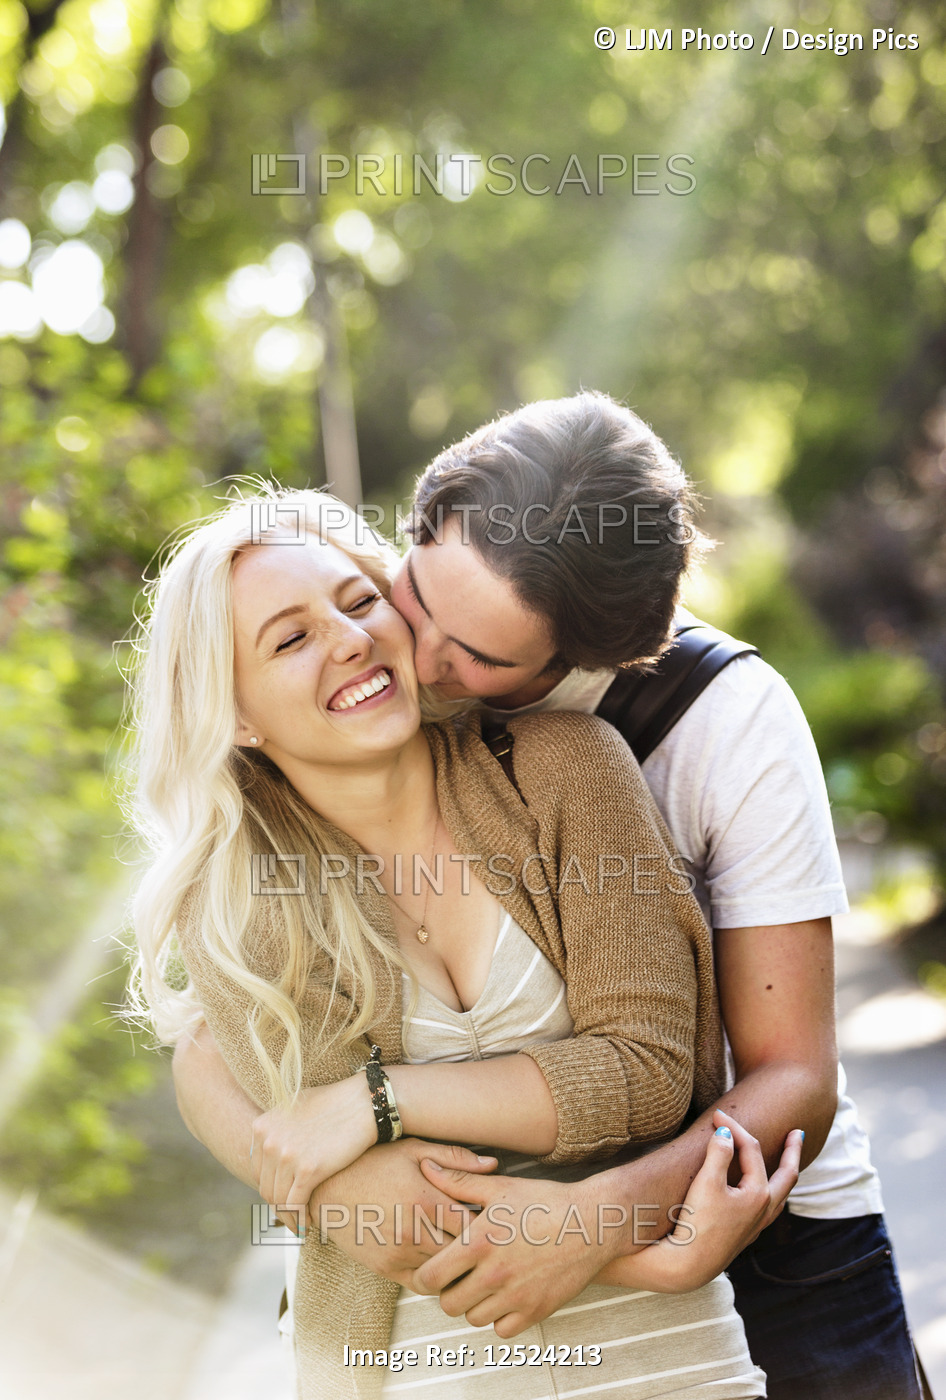 A young couple shares a romantic moment together in an embrace on a pathway on ...